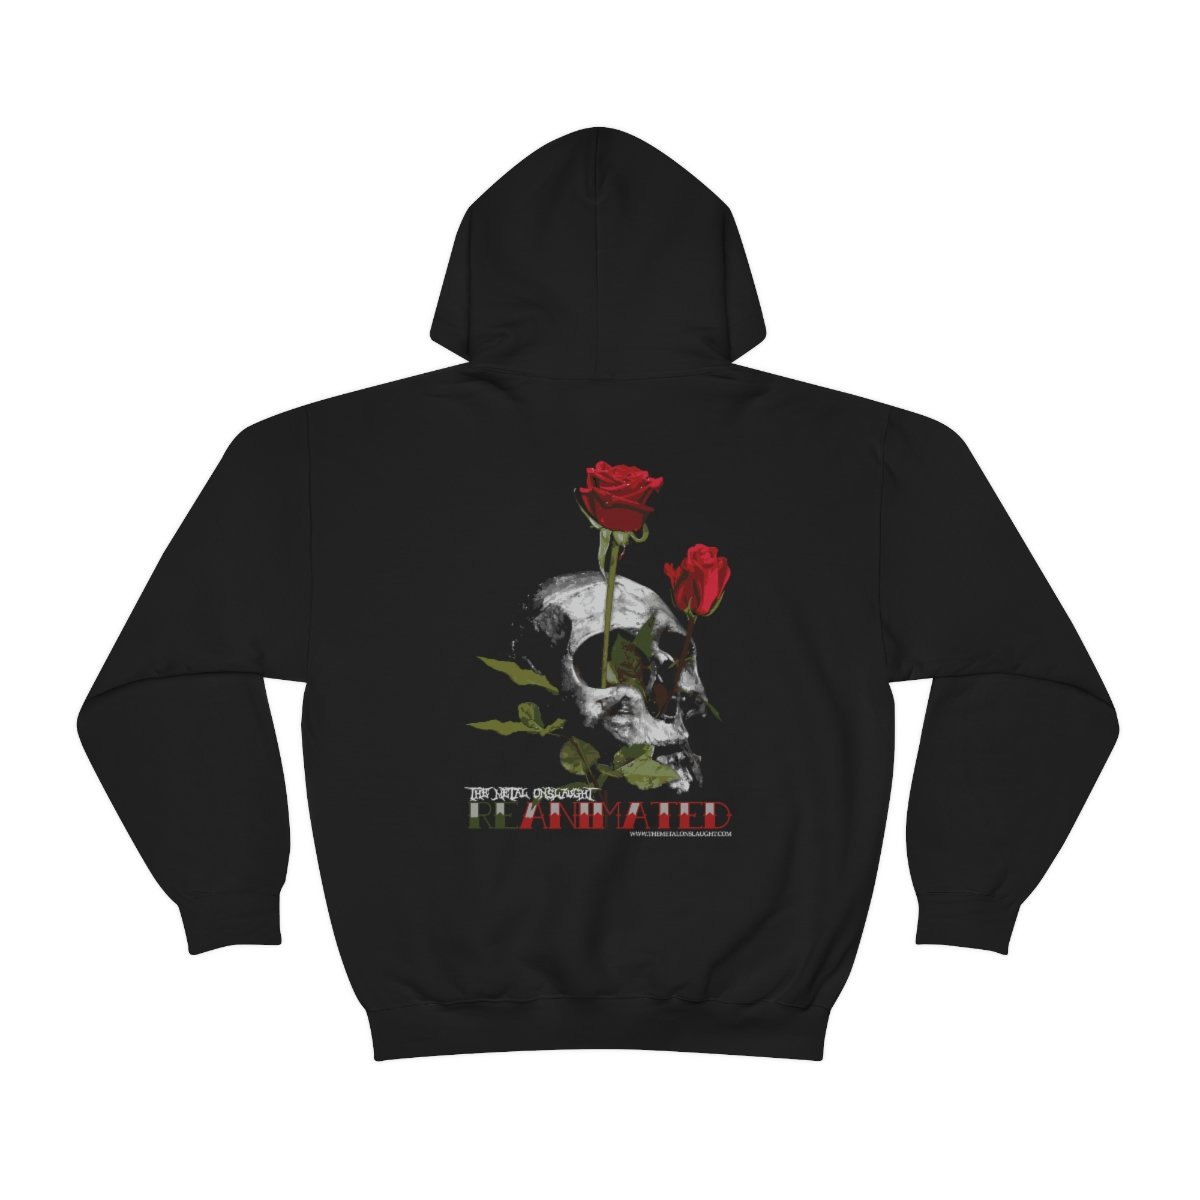 The Metal Onslaught Magazine – Death To Life Pullover Hooded Sweatshirt